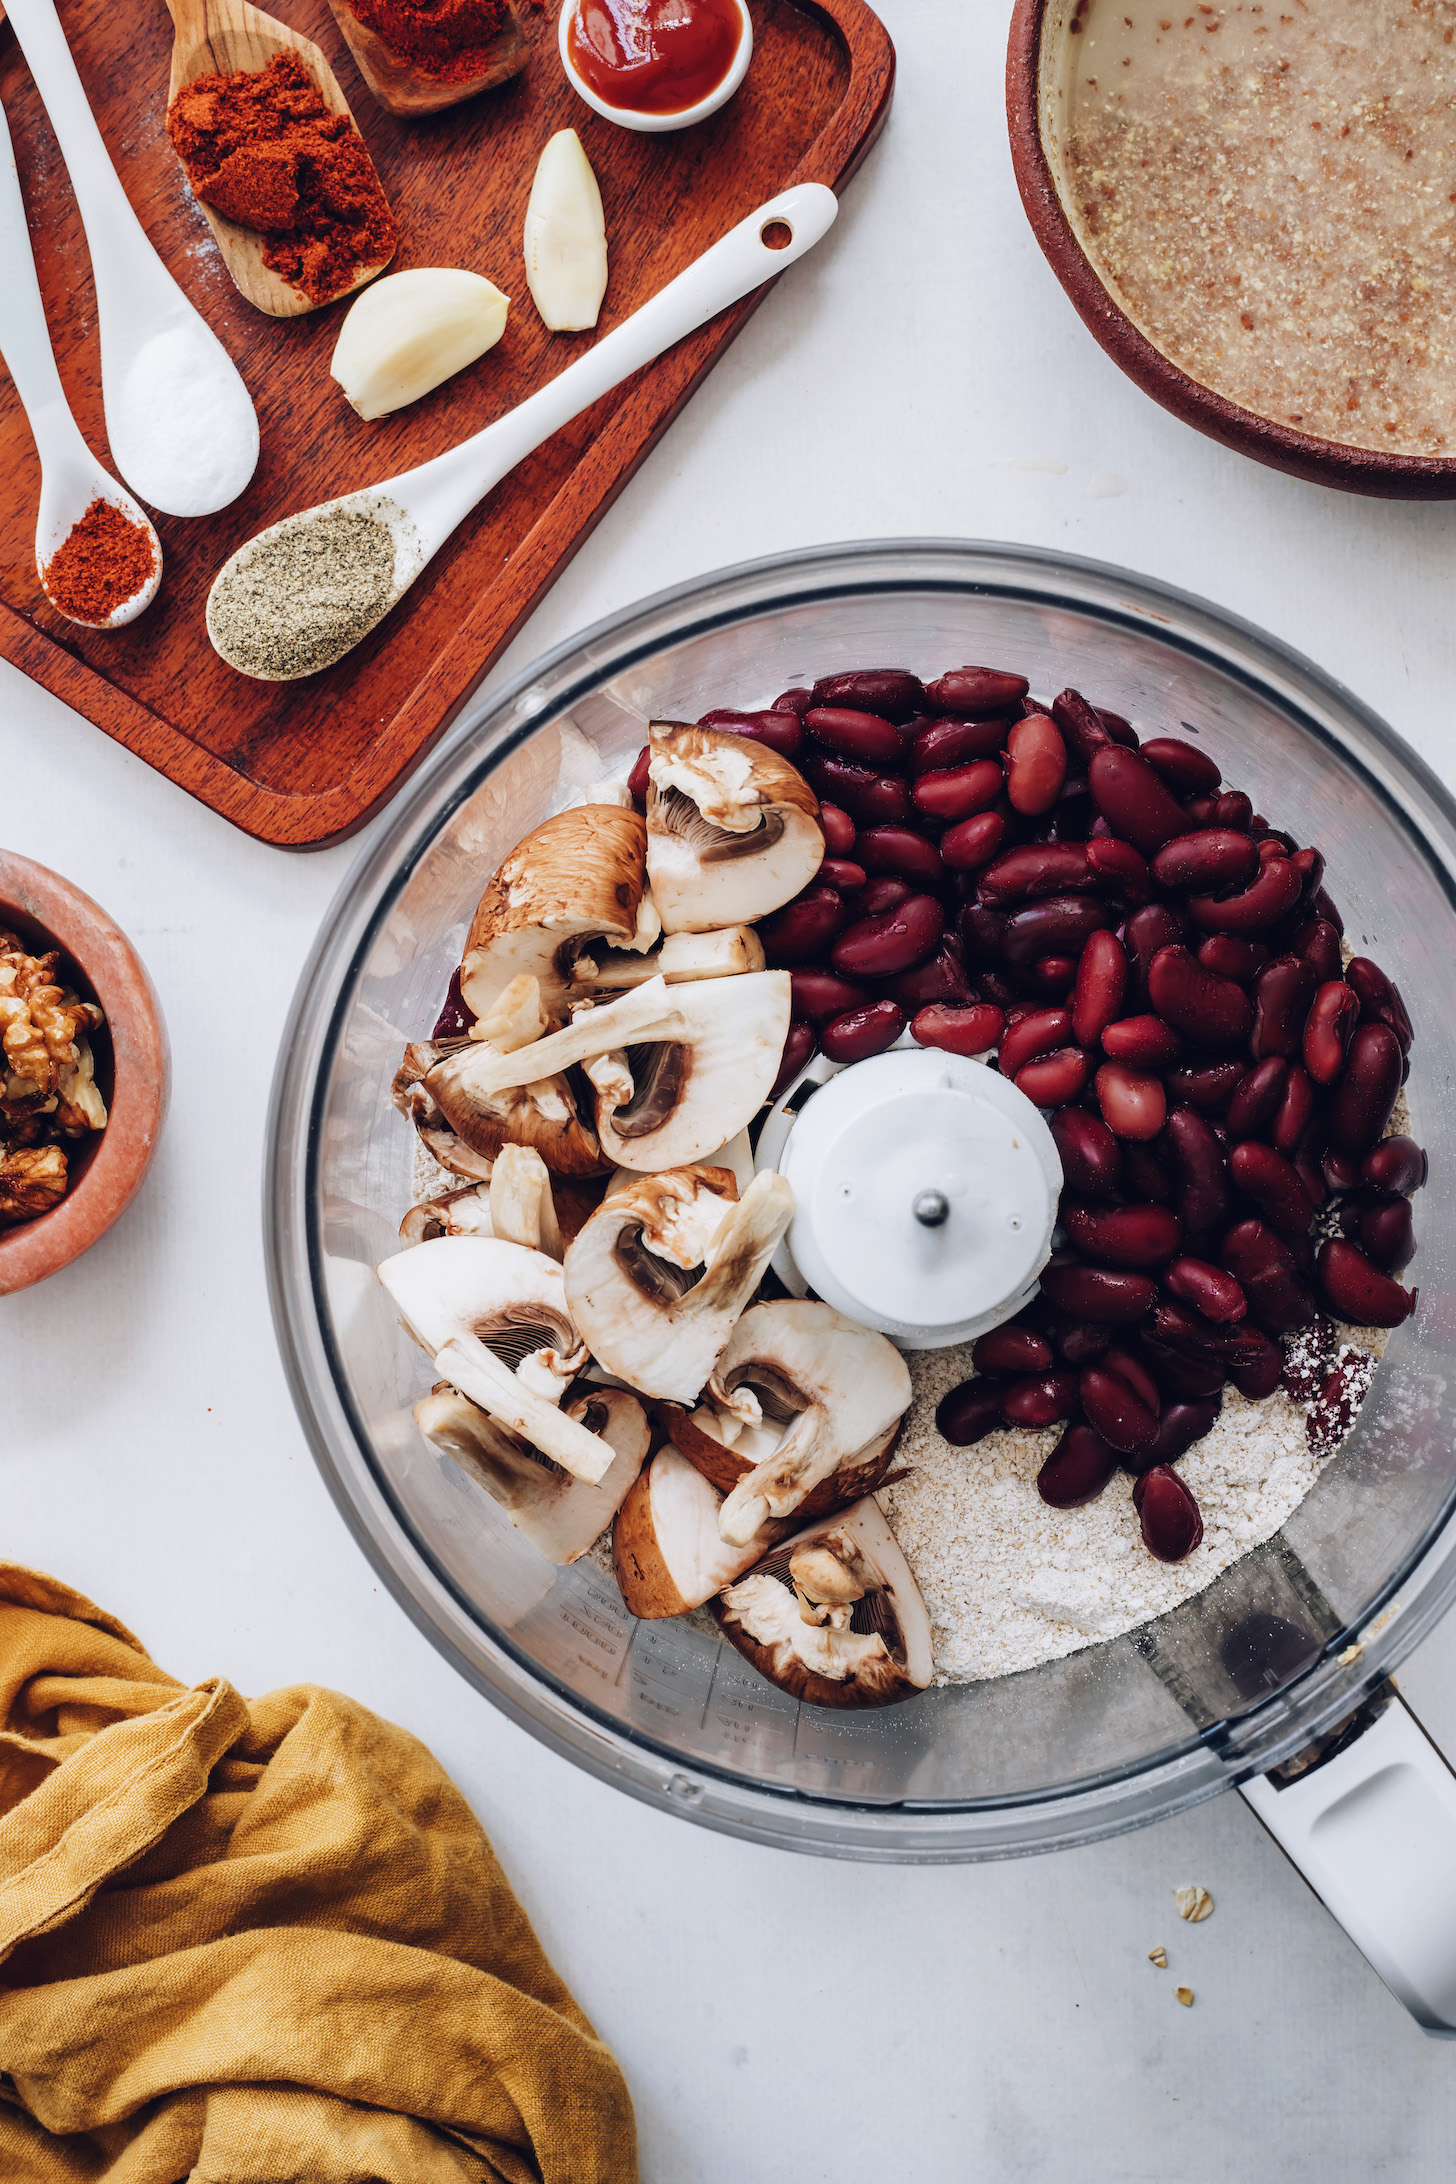 Mushrooms, kidney beans, and oats in a food processor